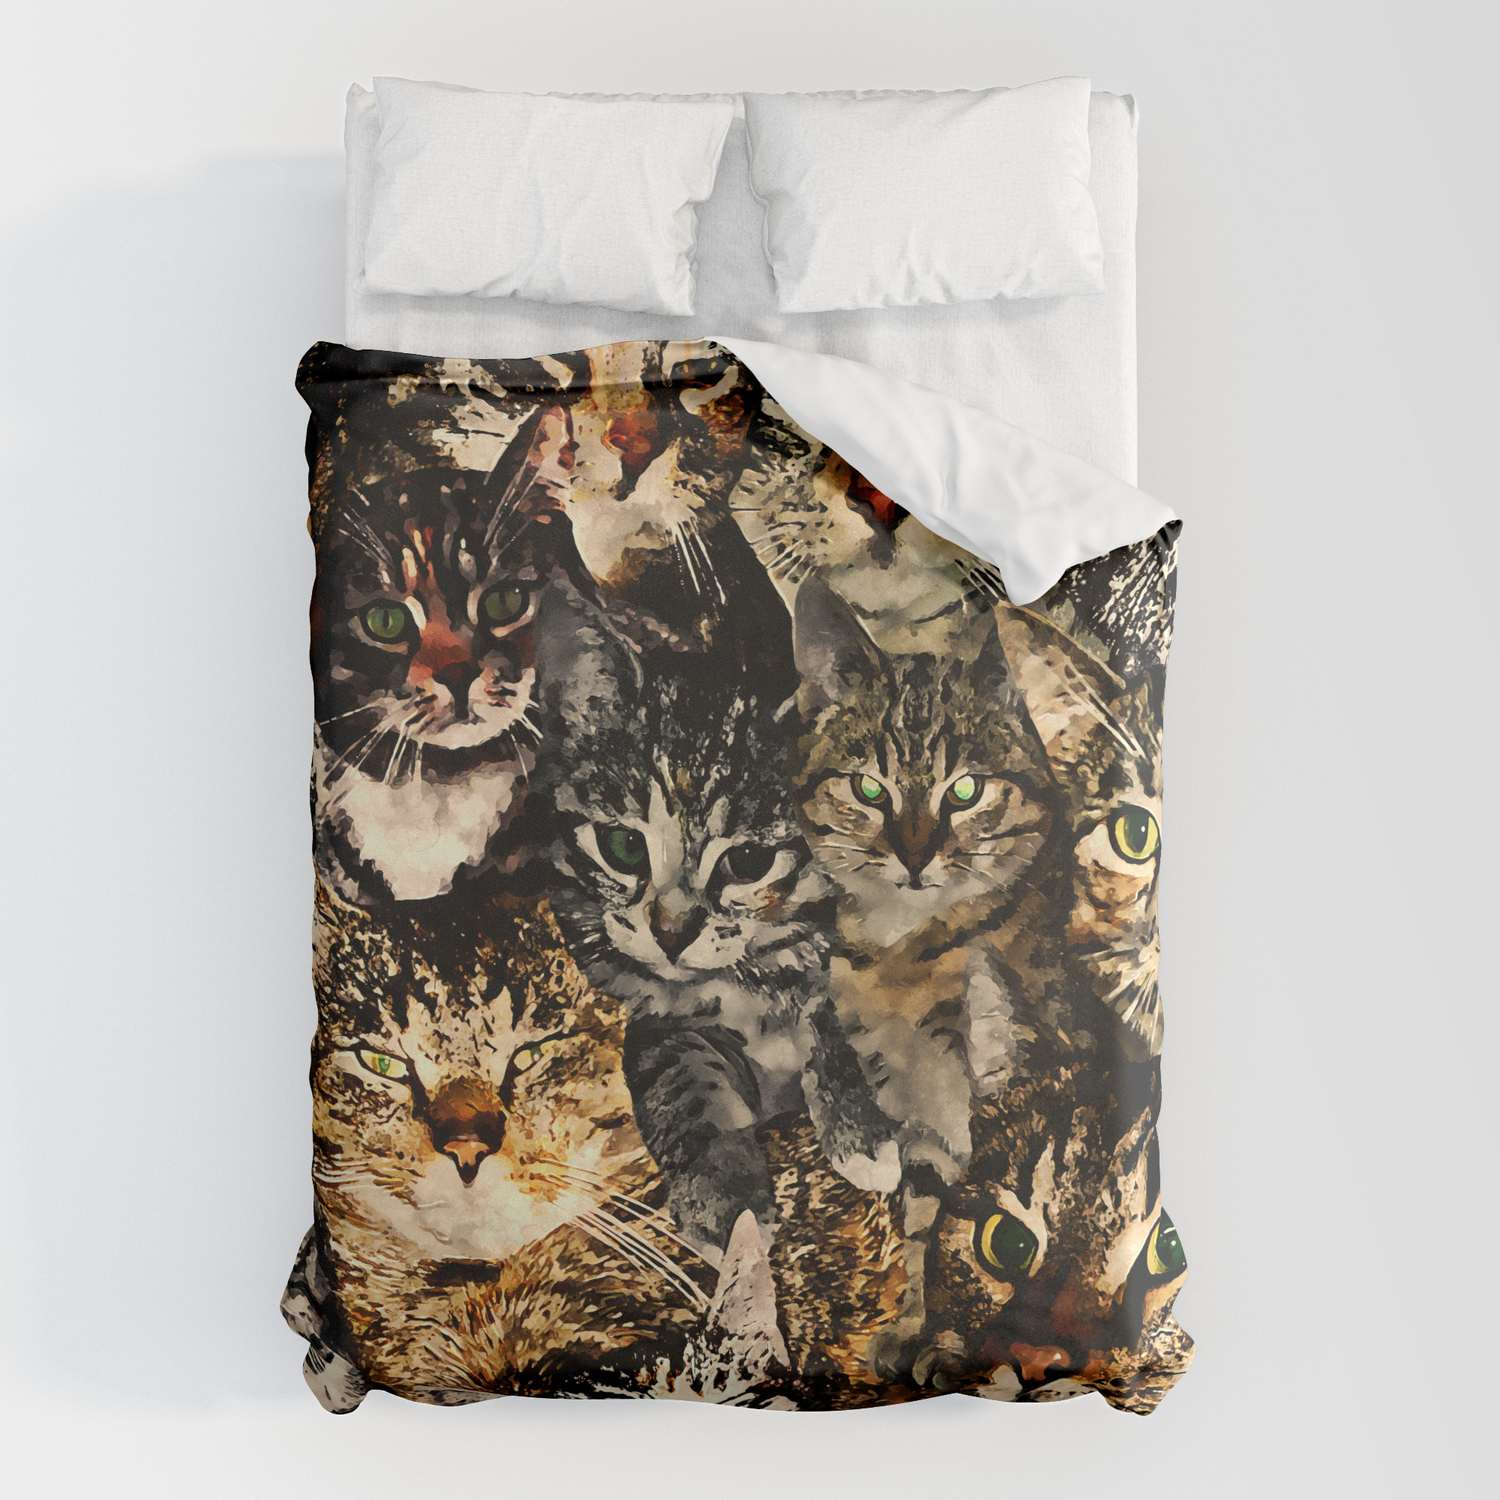 stopcontact kijk in abces cat collage our beloved kitten cats watercolor splatters Duvet Cover by gxp  design | Society6